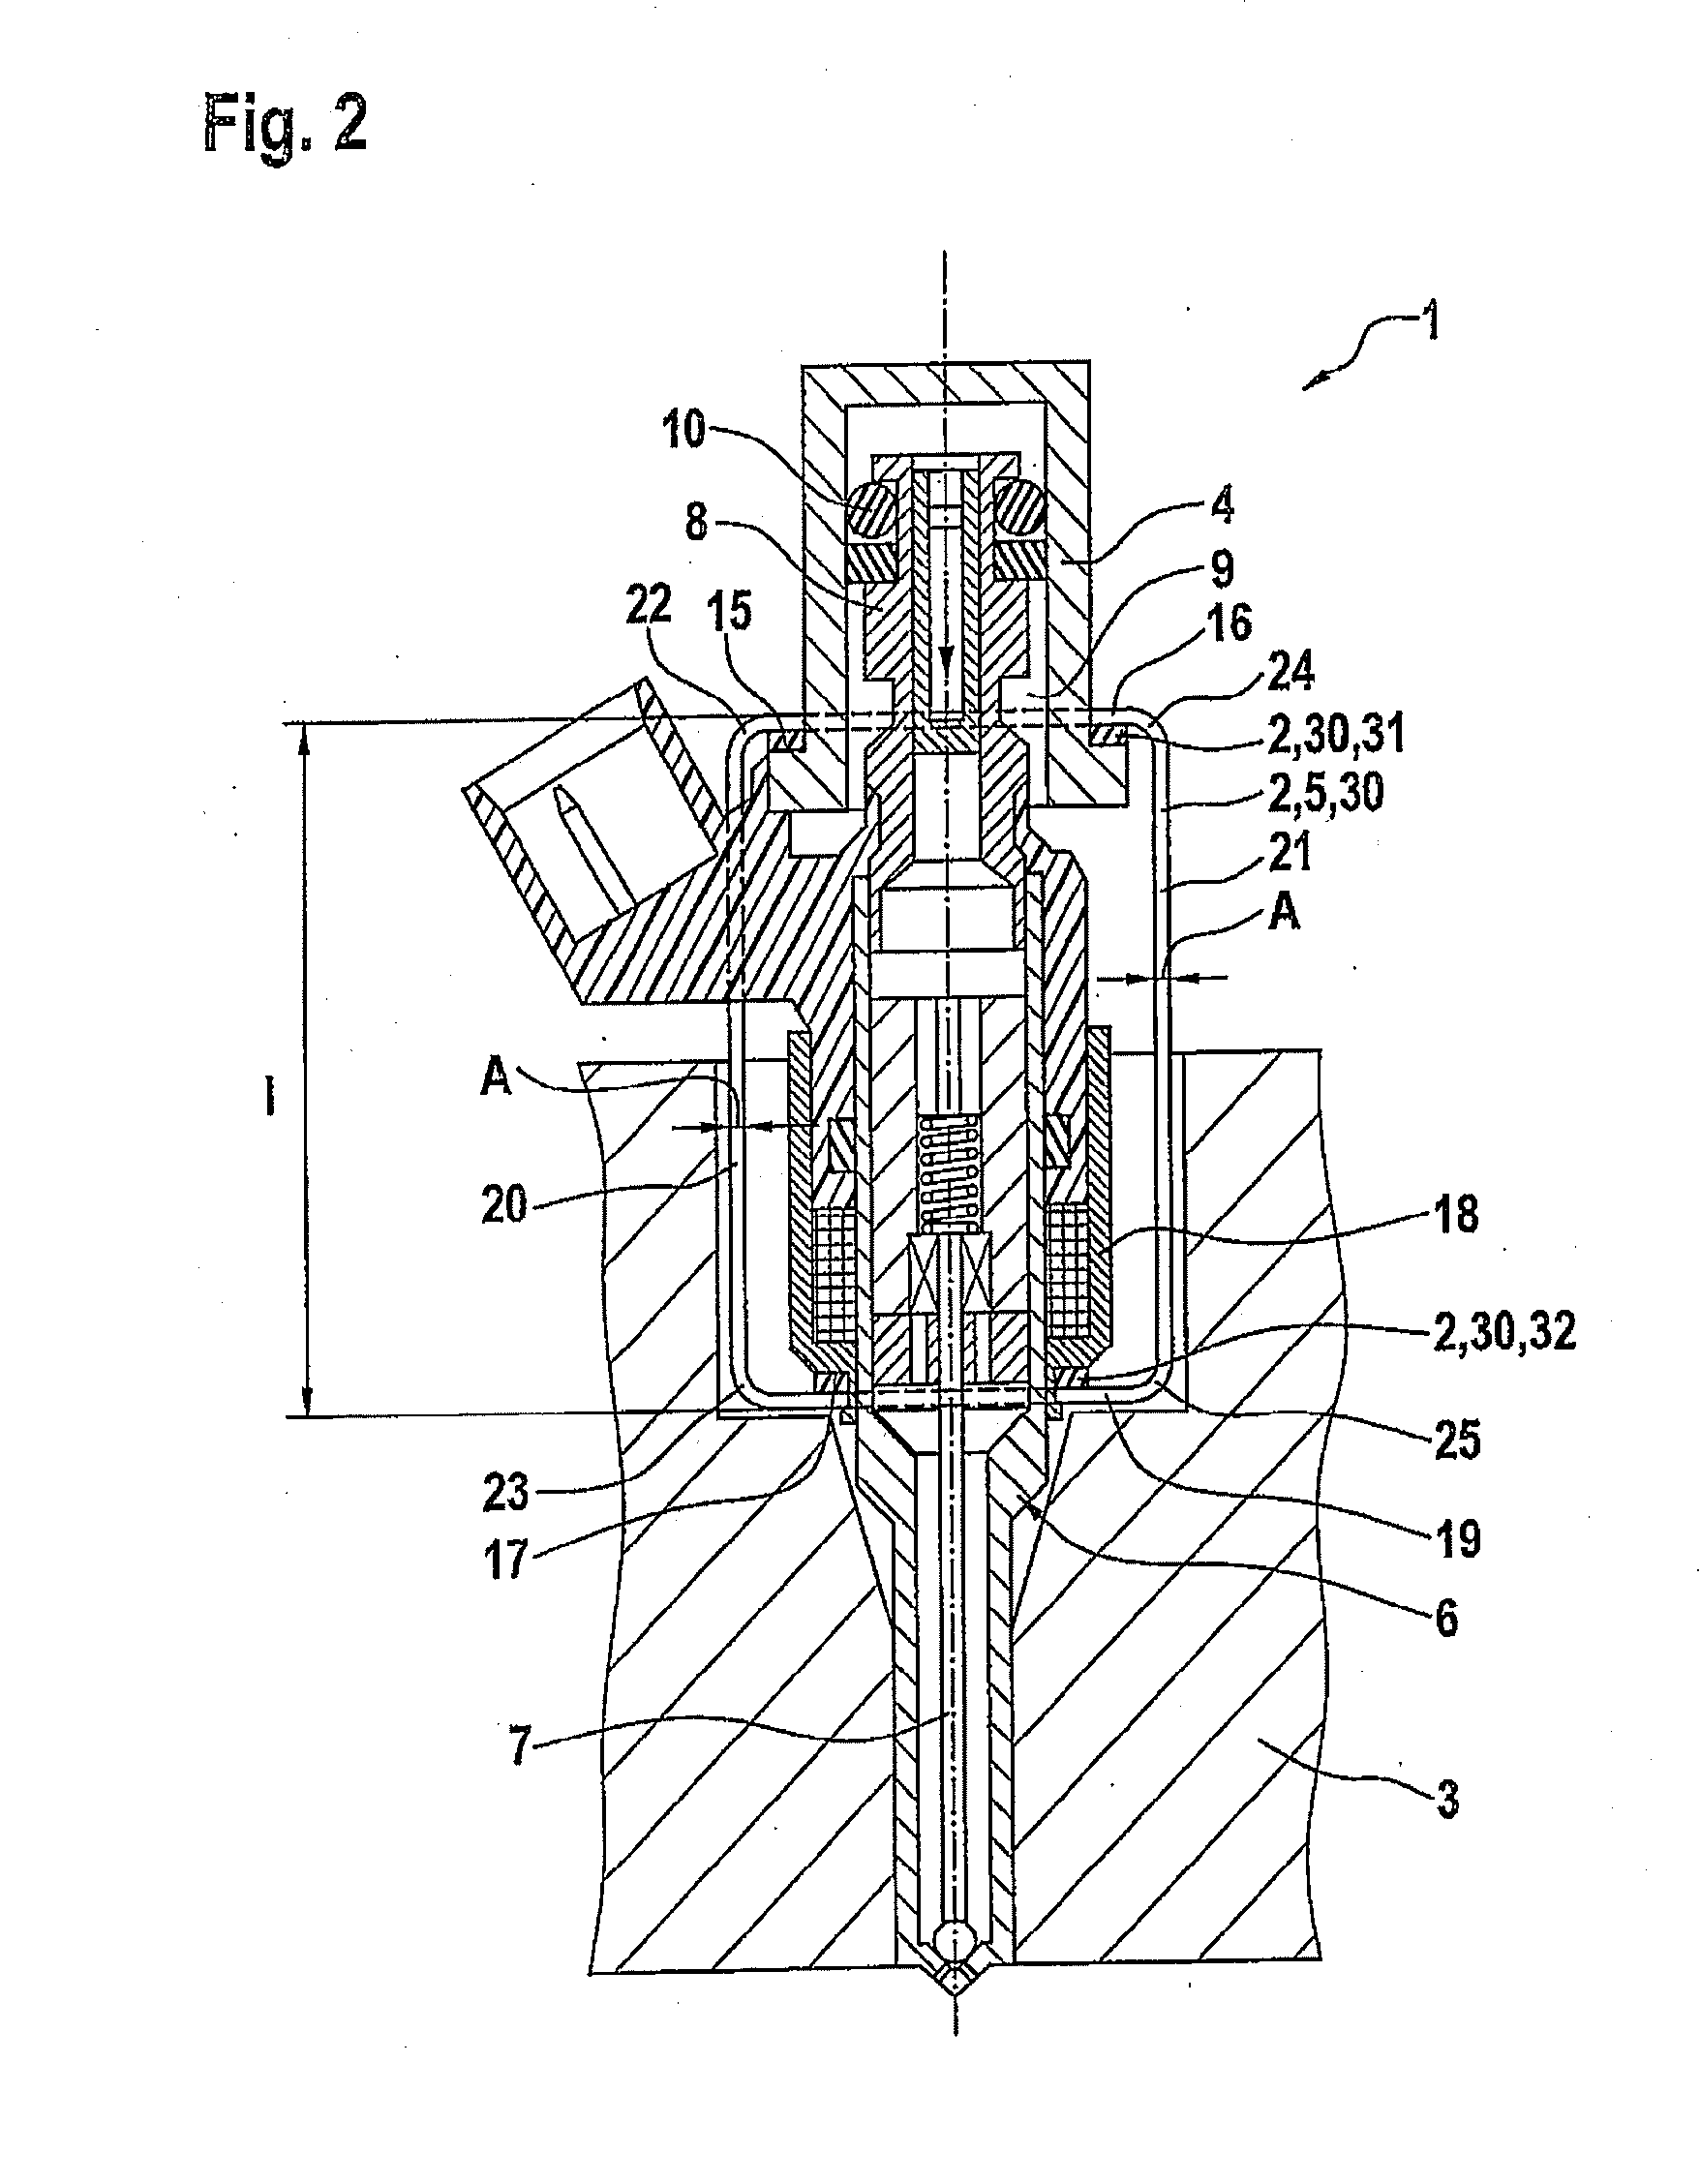 Fuel injection system having a fuel-carrying component, a fuel injector and a connecting device